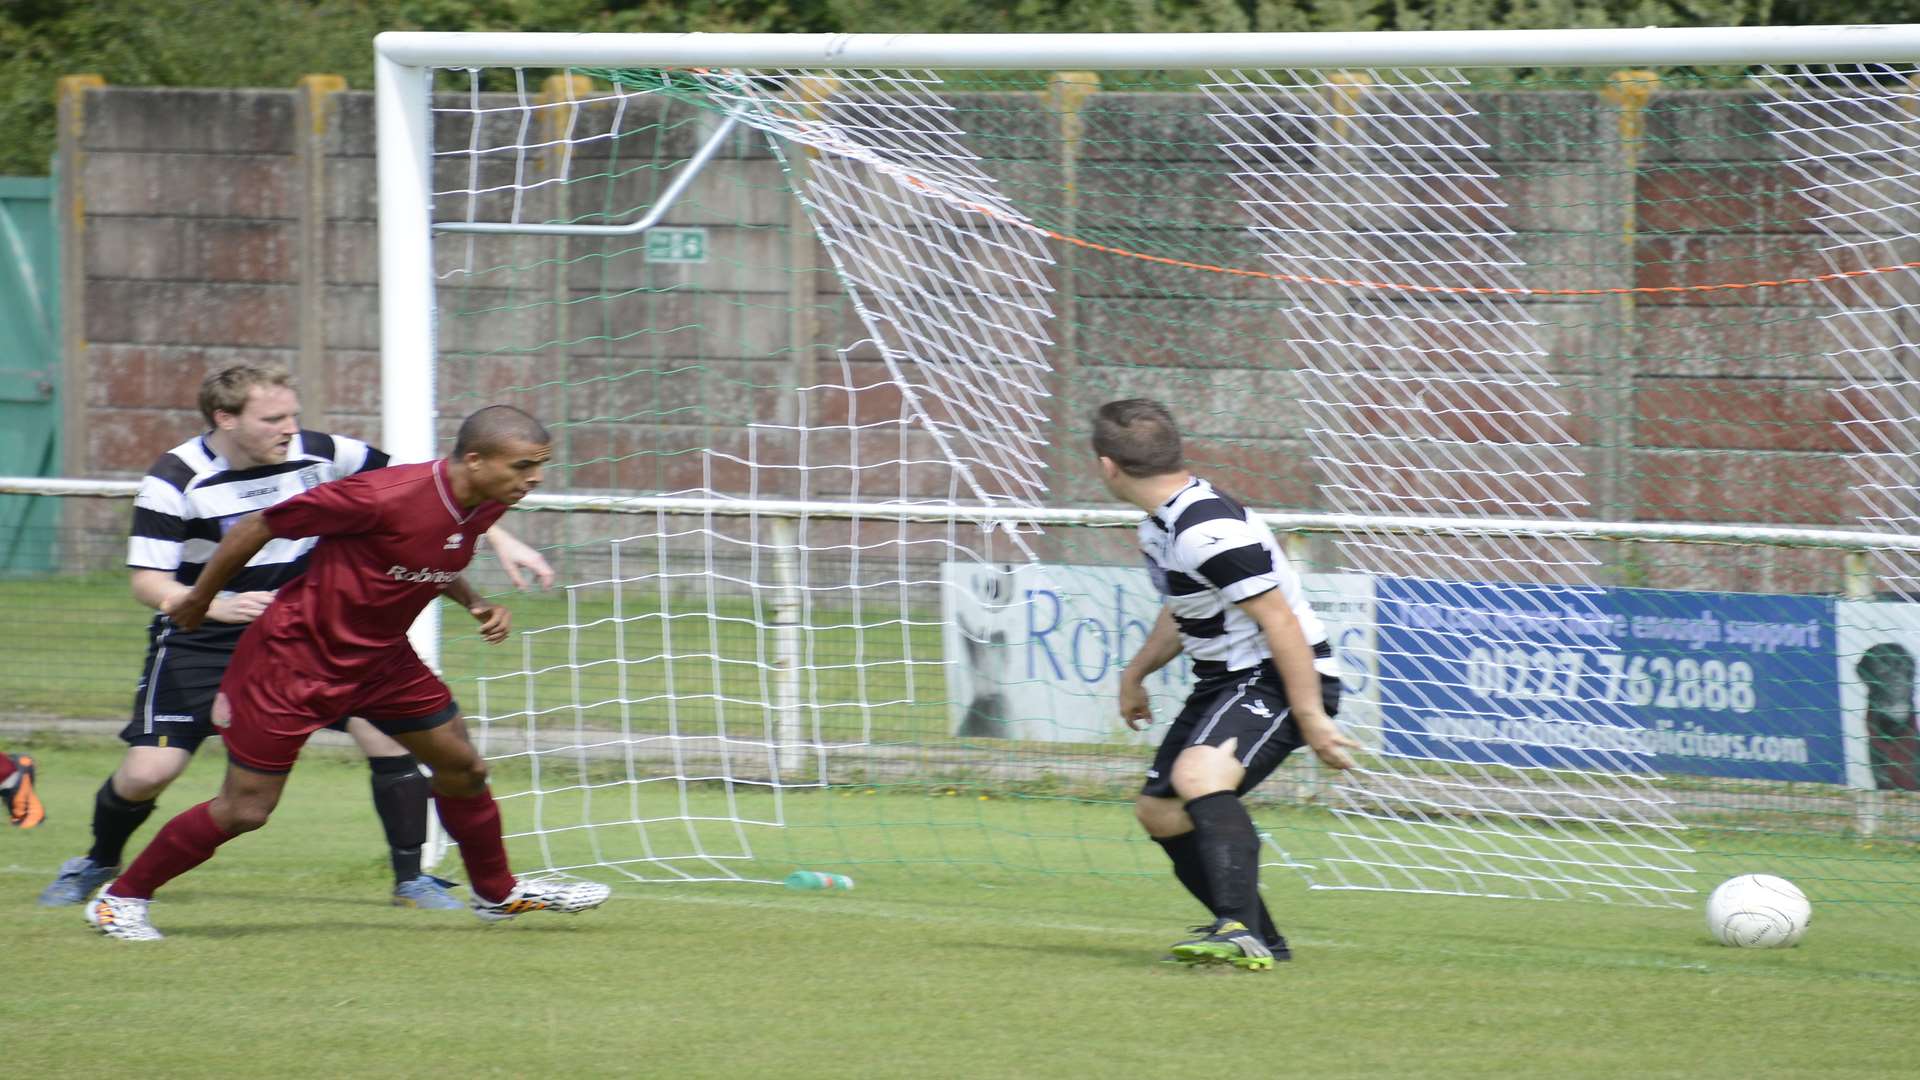 Canterbury City (maroon) in action against Deal